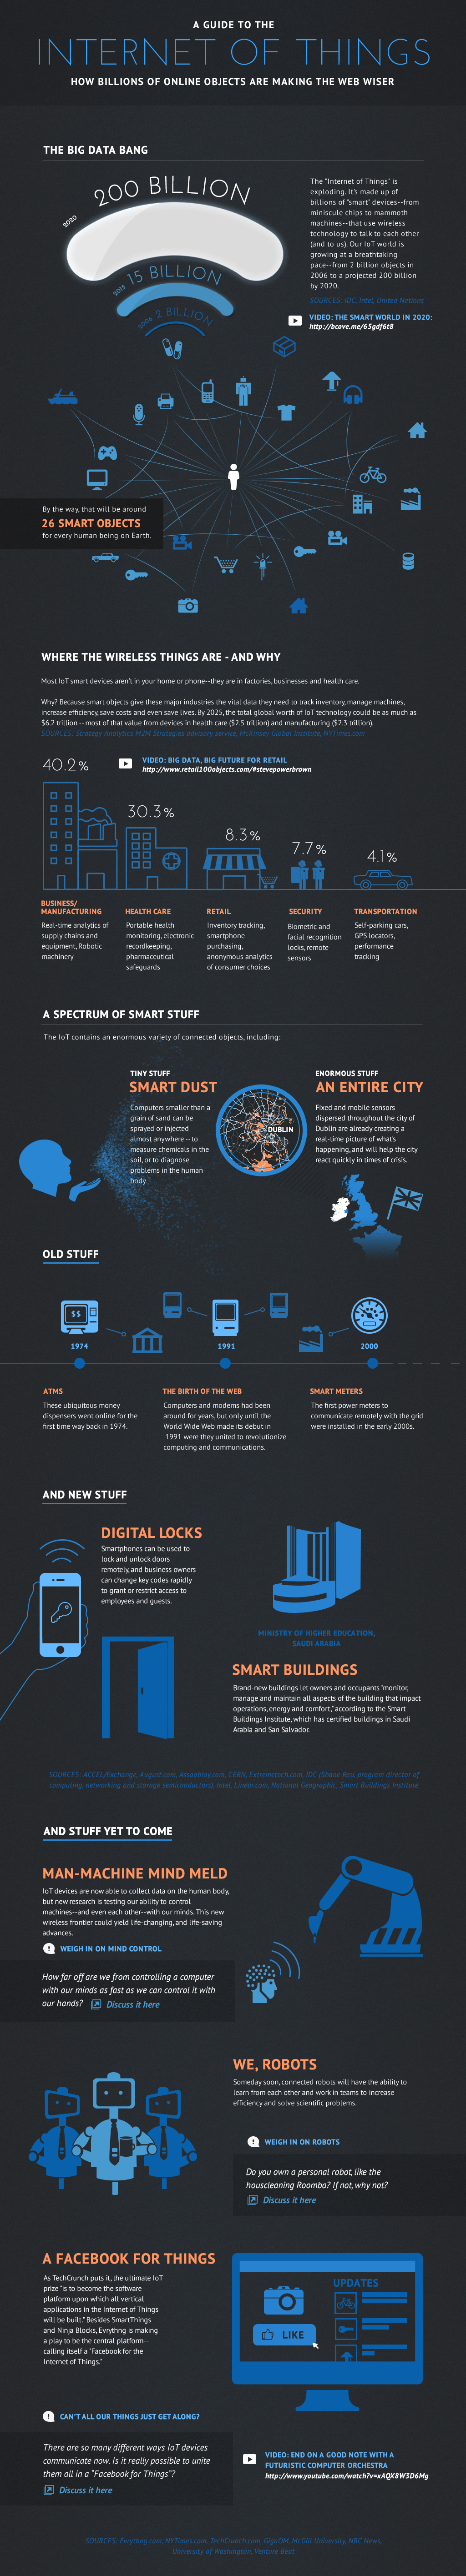 How The Internet of Things Will Make Our World Smart- Infographic